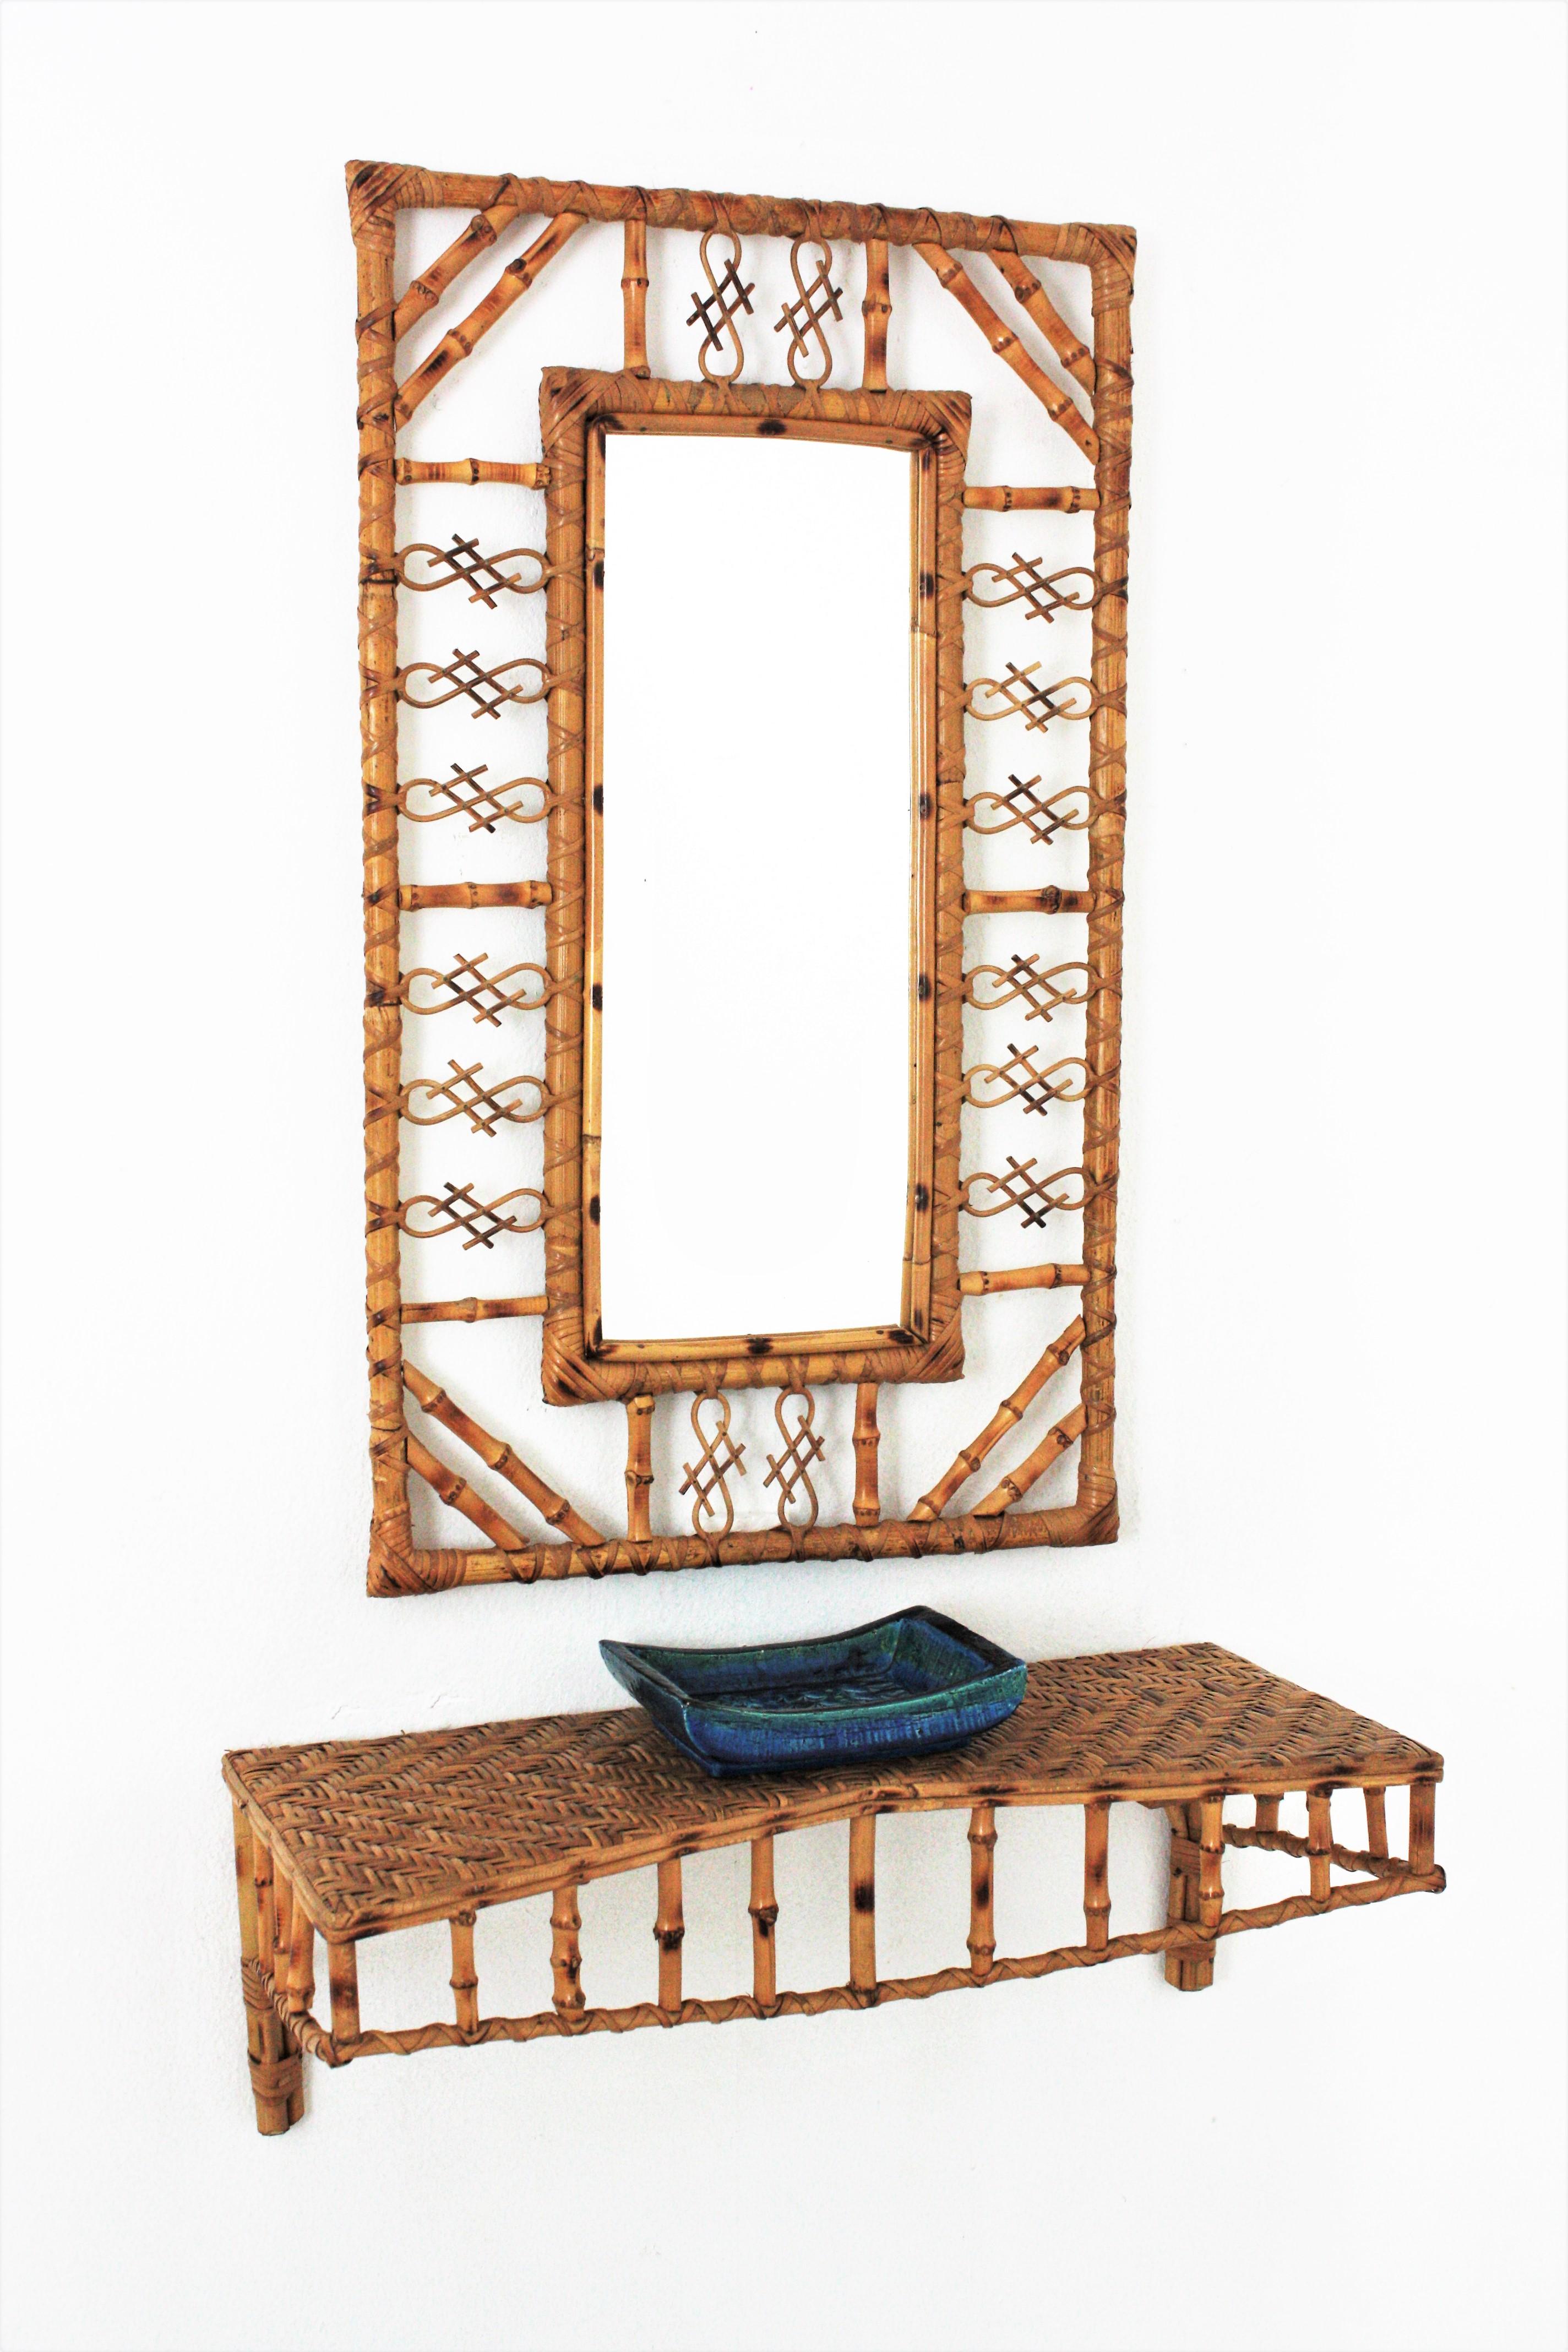 Eye-catching set of rattan and bamboo rectangular mirror with floating console table / shelf, France, 1950s.
The mirror has chinoiserie and bamboo decorations on the frame and joining the corners. The wall console shelf has a structure made of